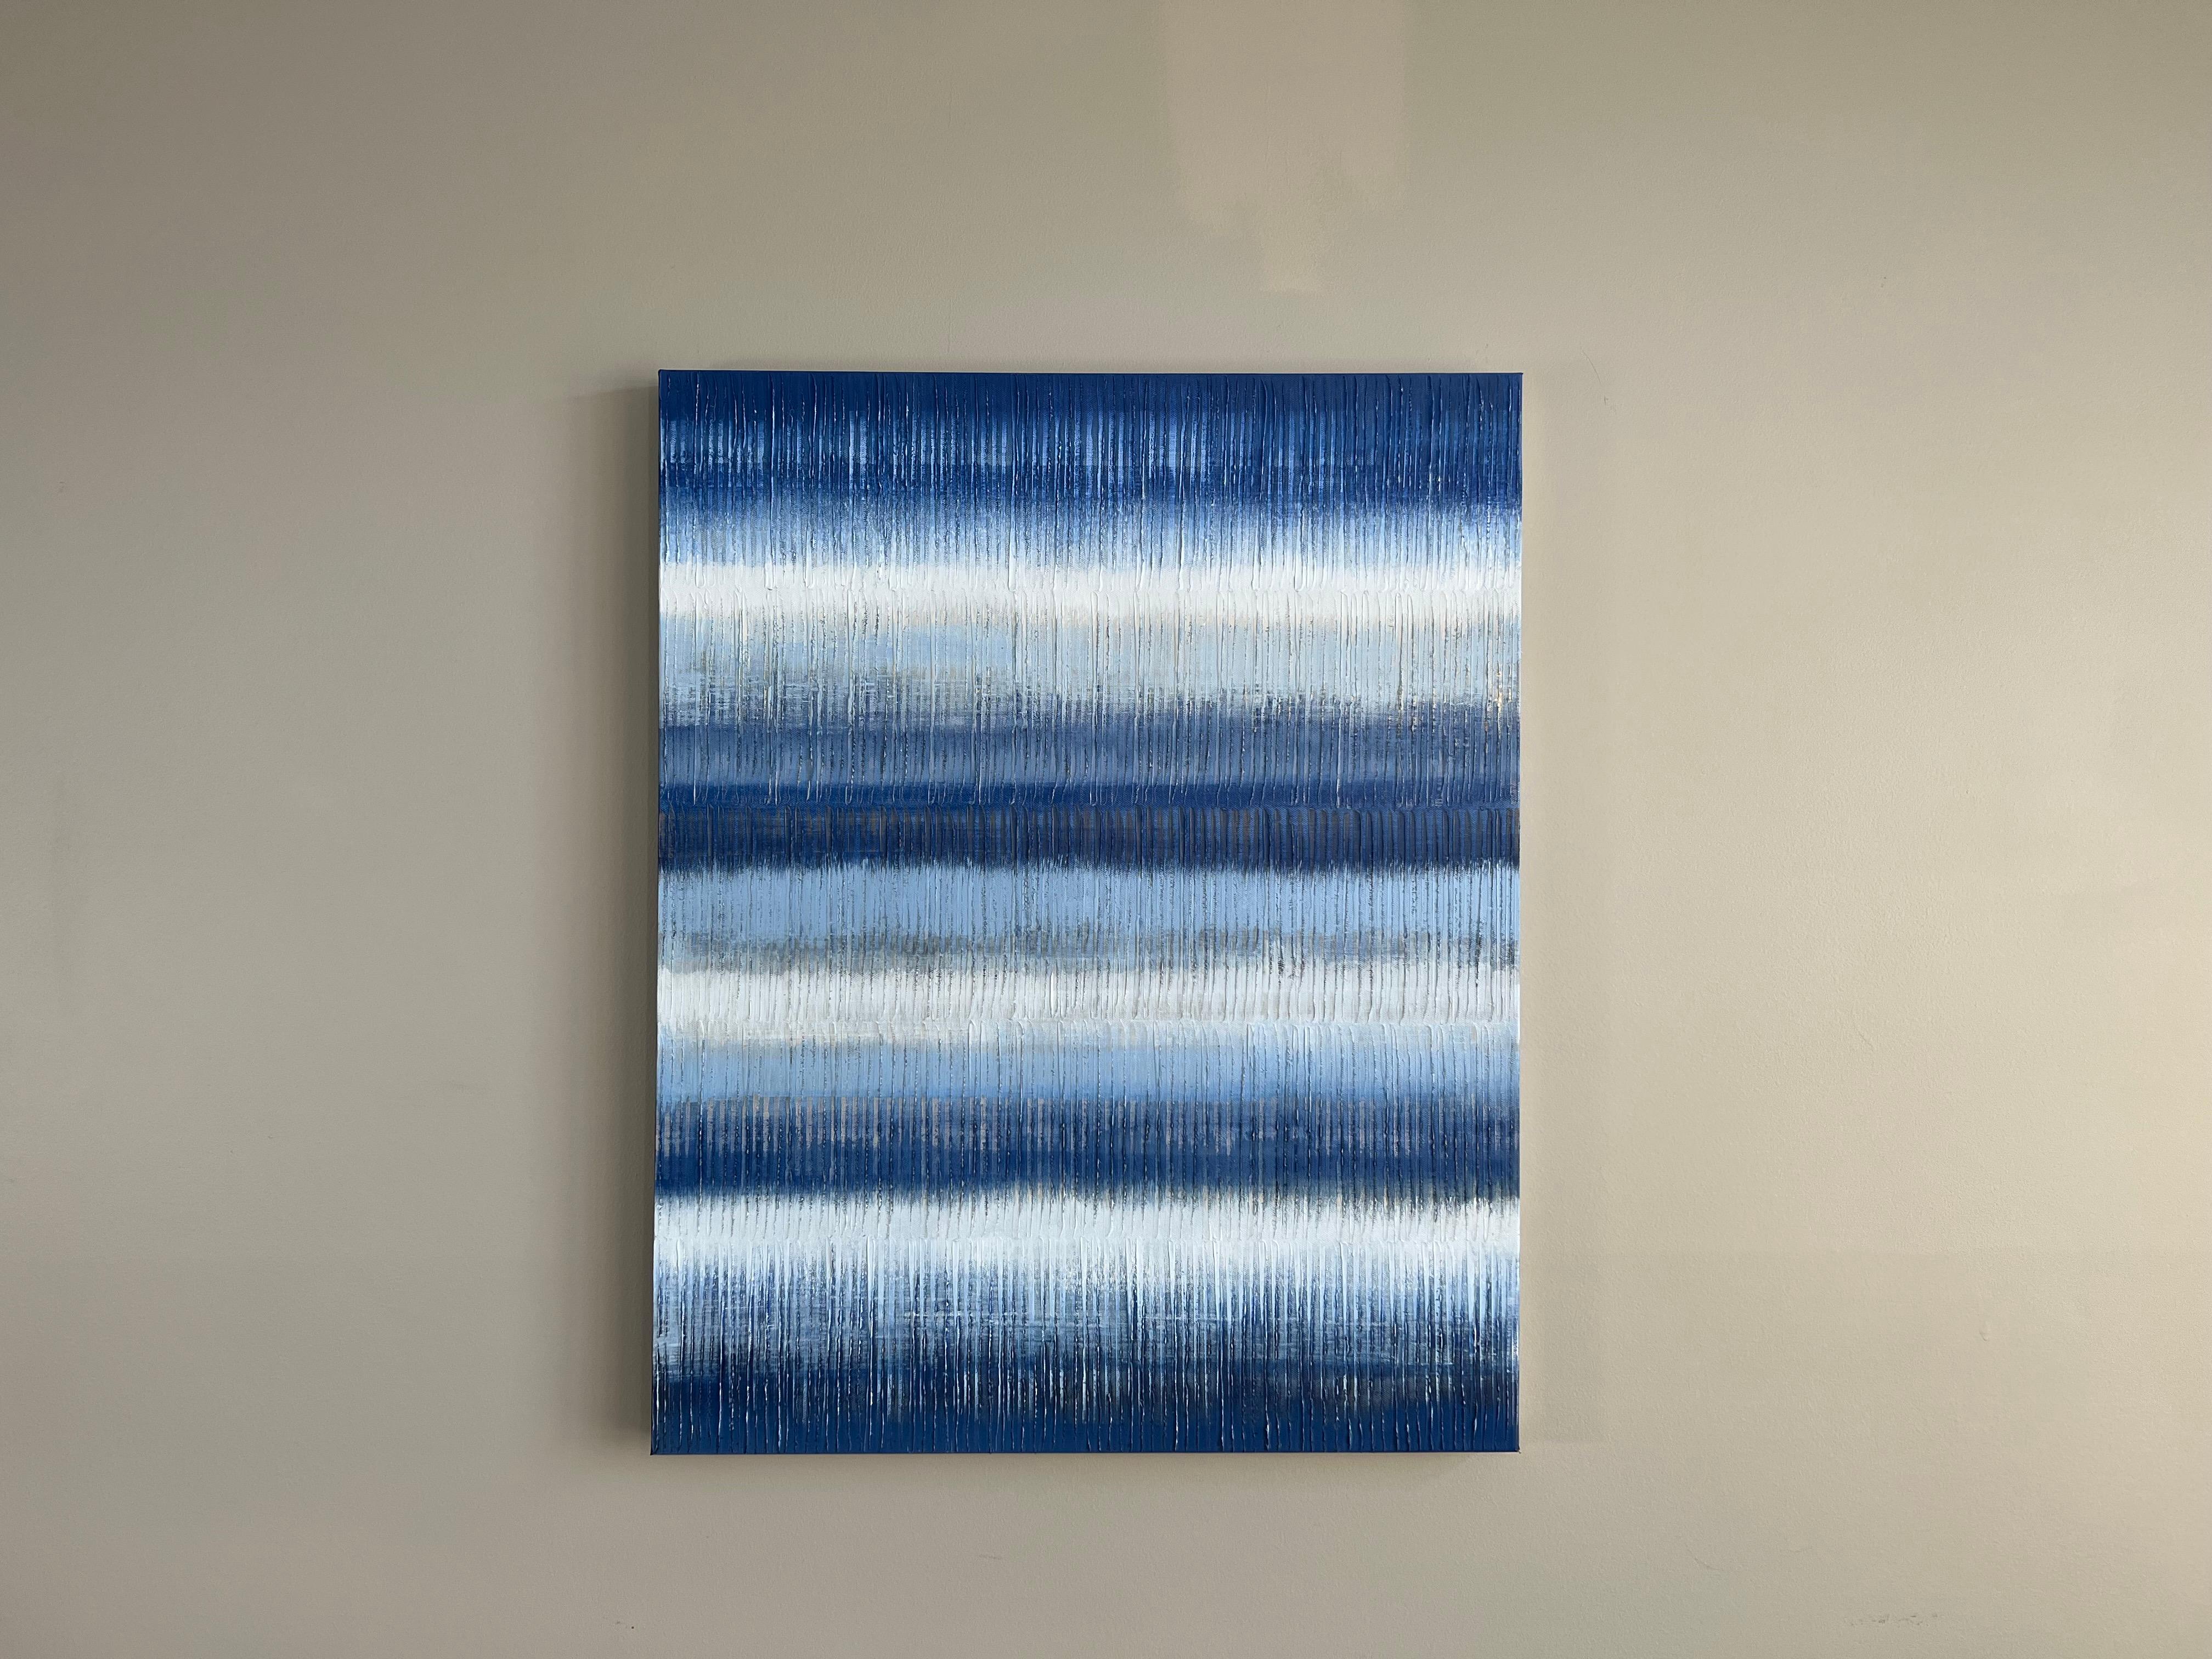 <p>Artist Comments<br>Artist Janet Hamilton depicts an intricately textured abstract painting with rich gradations of color. She paints vivid indigo rays elegantly rising to meet pristine white. Structured frequencies of blue hues delicately flow